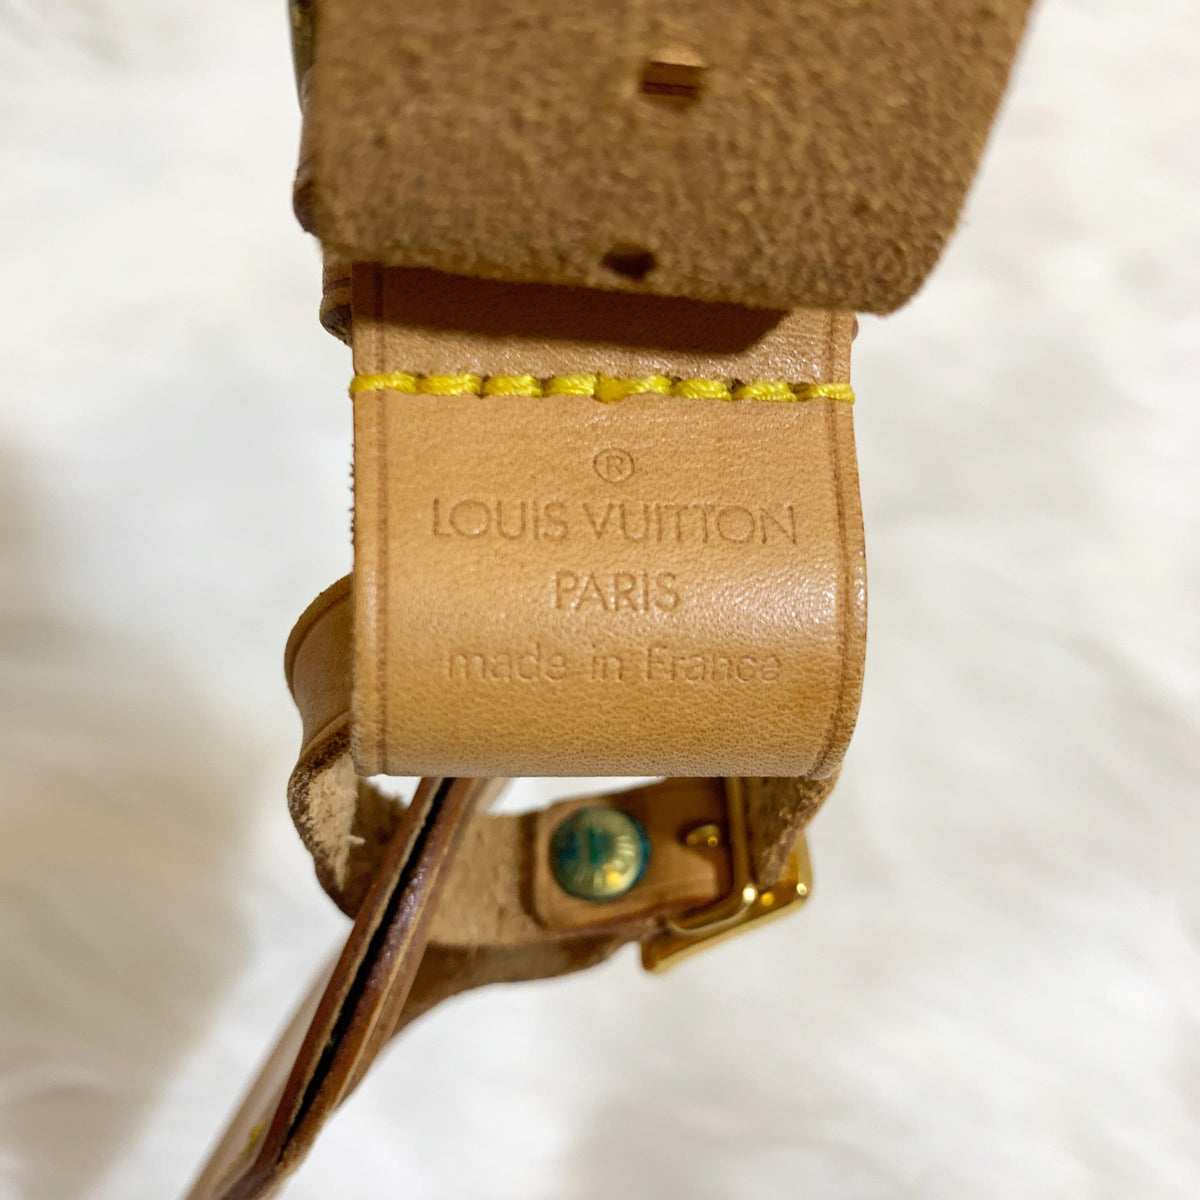 Pre-Owned Authentic Louis Vuitton Leather Name Tag (009